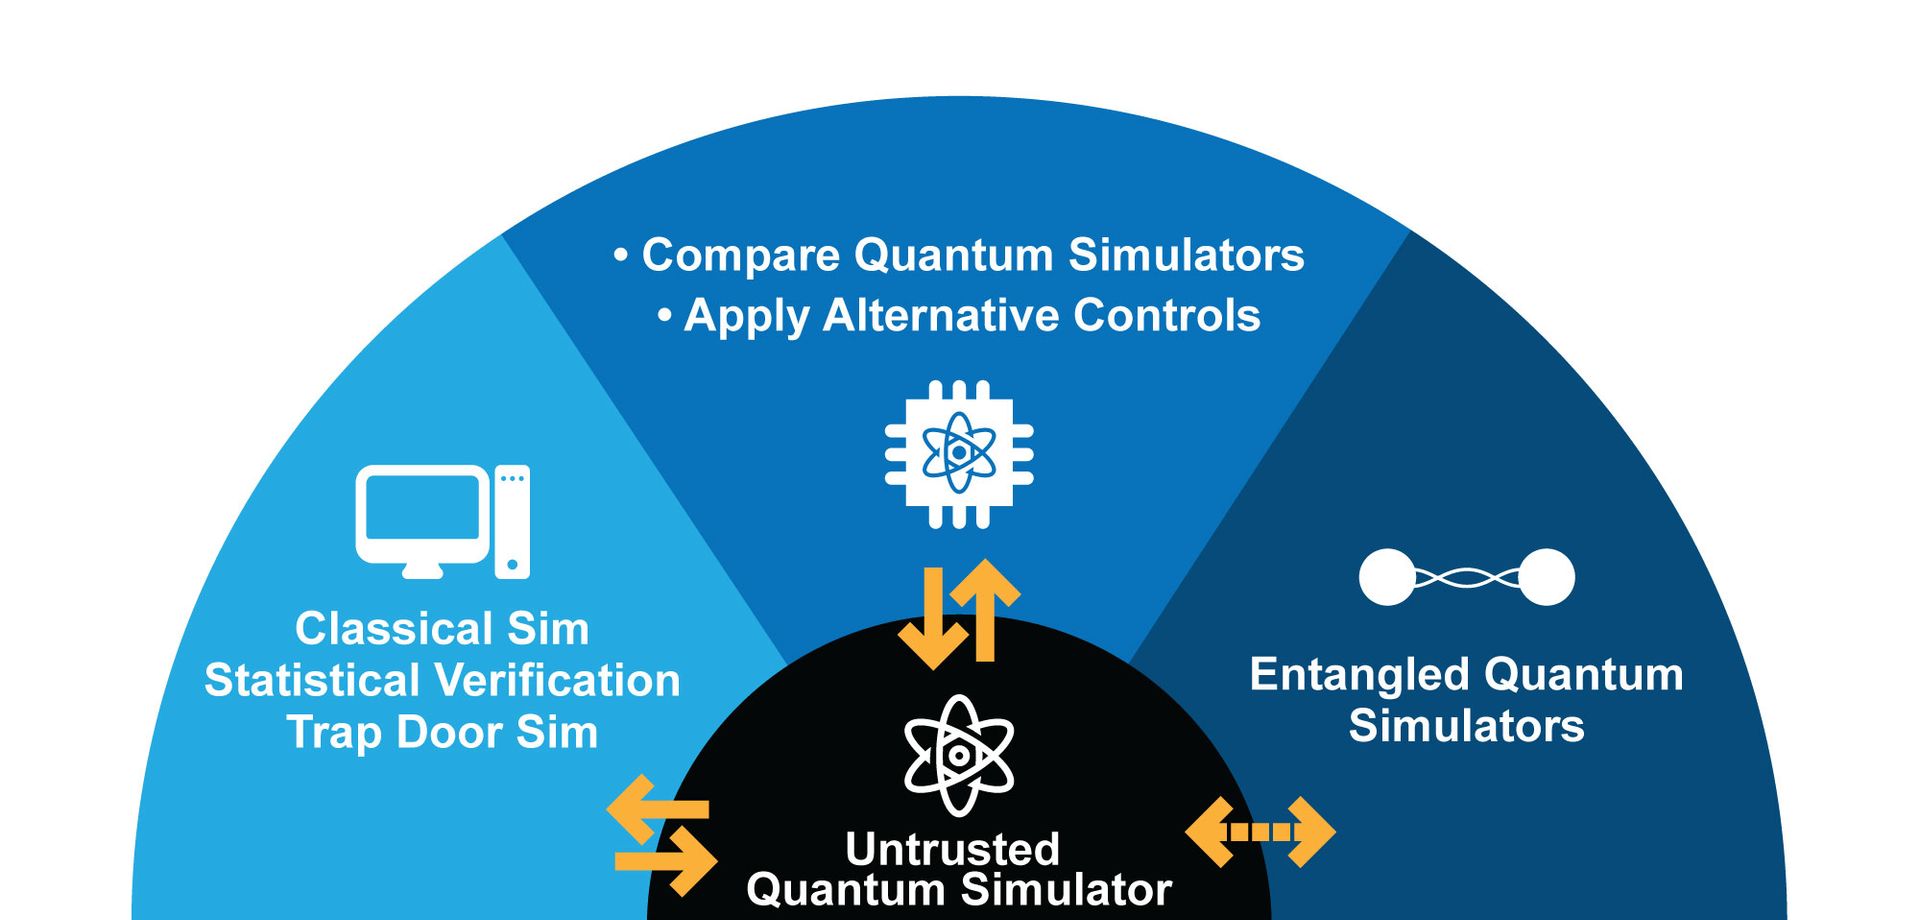 graphic showing the relationship between different research areas related to verified quantum simulations